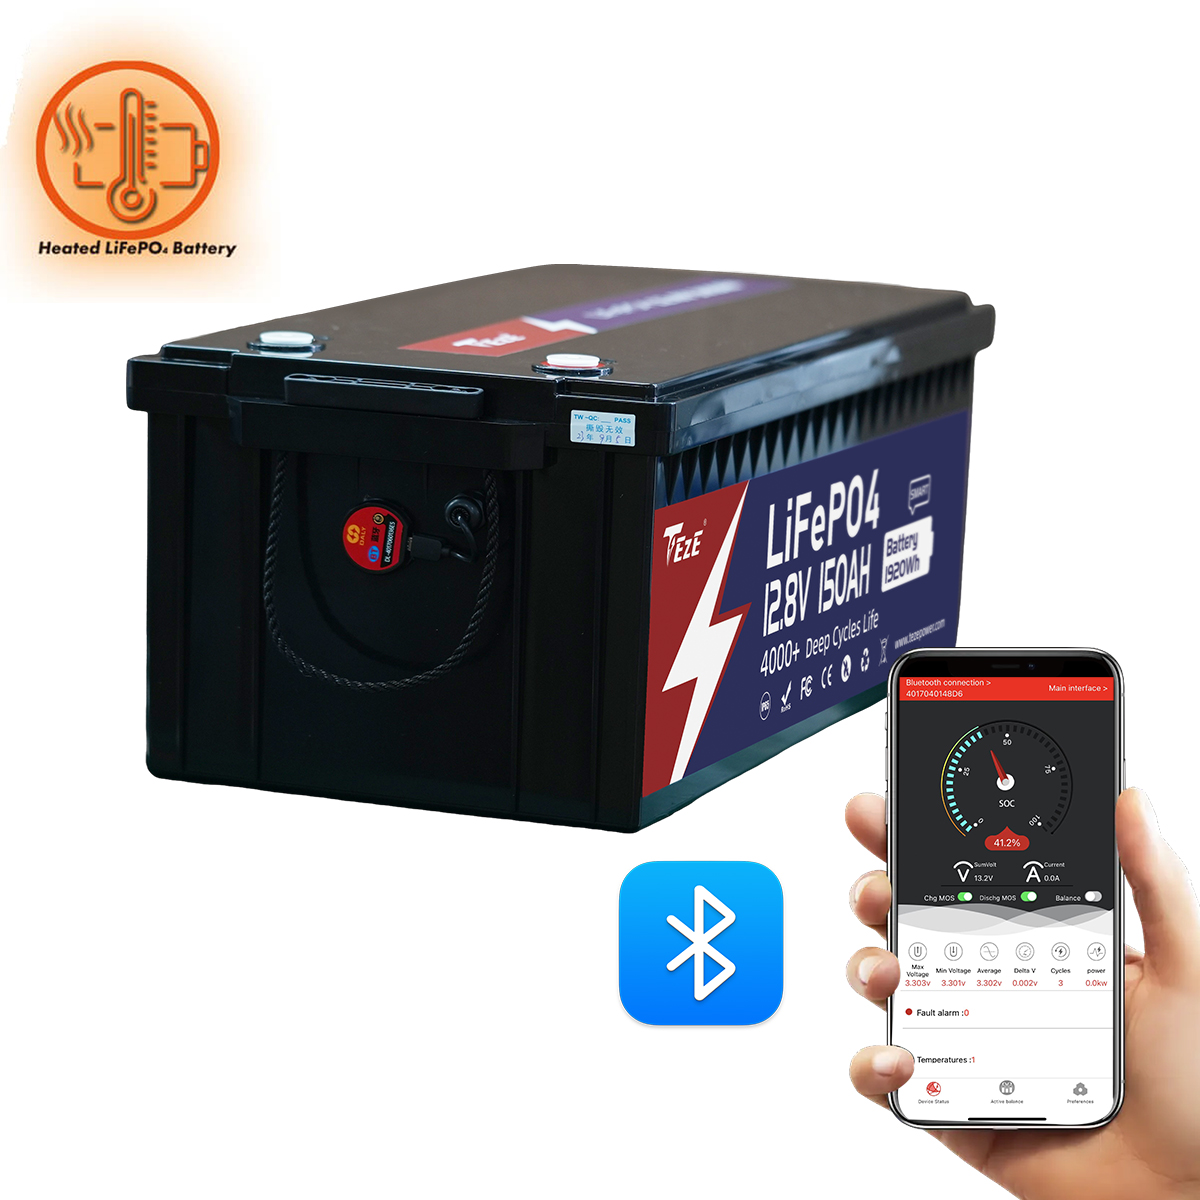 NEW-TezePower 12V150Ah LiFePO4 Battery with Bluetooth, Self-heating and Active Balancer, Built-in 150A Daly BMS (Bluetooth External Version)-TezePower